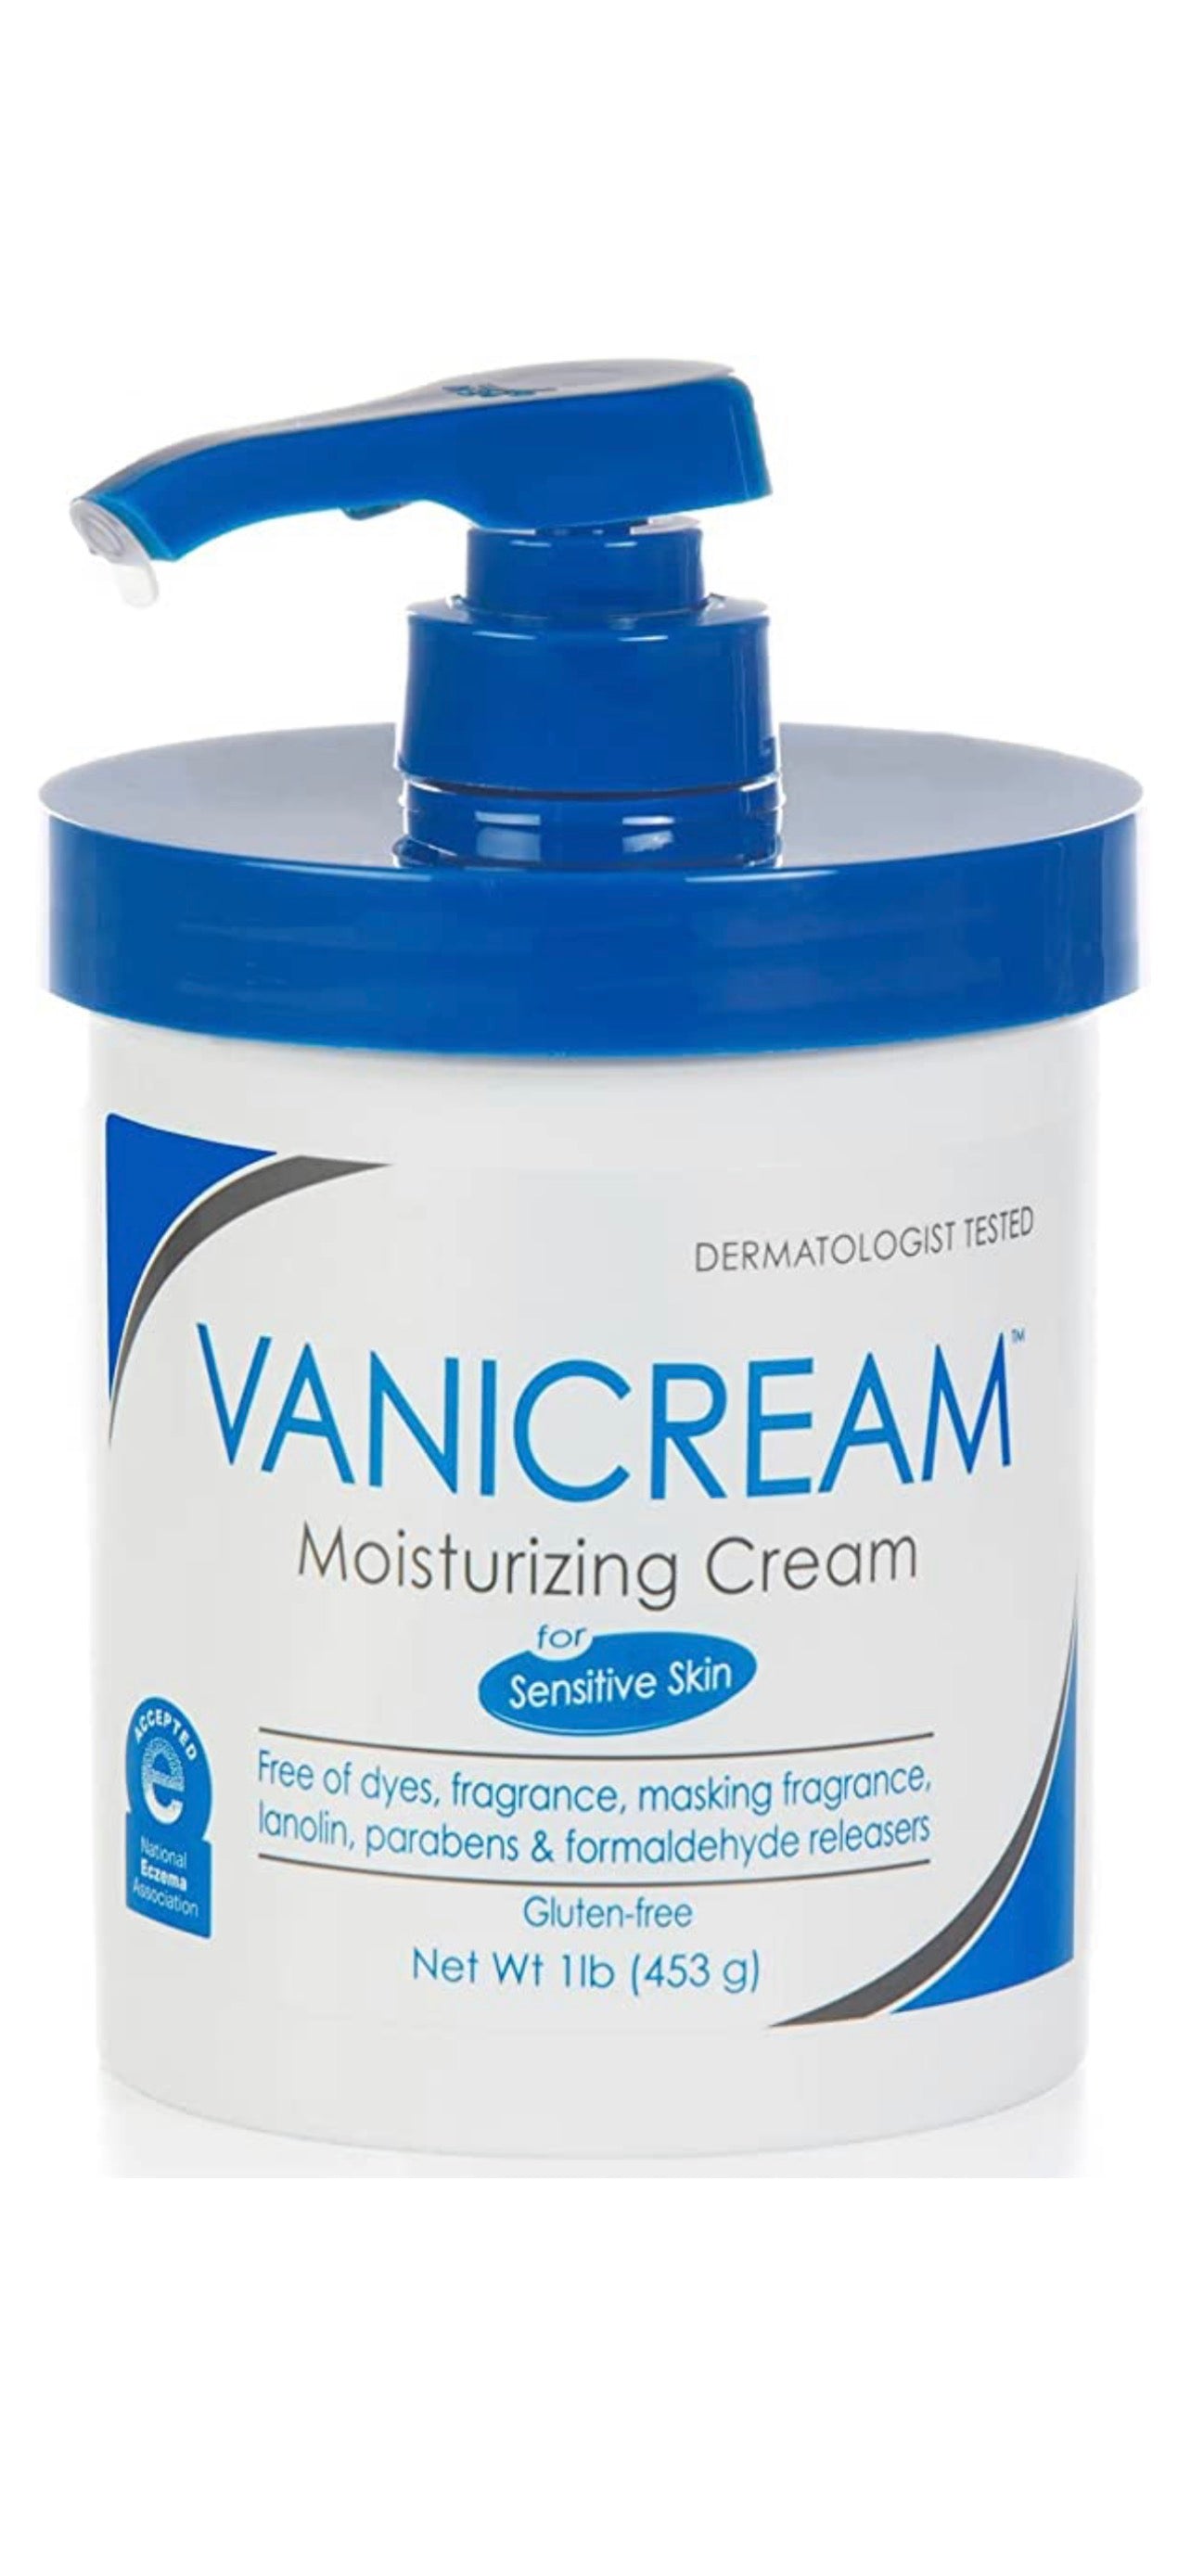 Vanicream MOISTURIZING SKIN CREAM with PUMP DISPENSER for SENSITIVE SKIN - 16 fl oz (1 lb) - Moisturizer Formulated Without Common Irritants for Those with Sensitive Skin - Supporting ORCRF.org